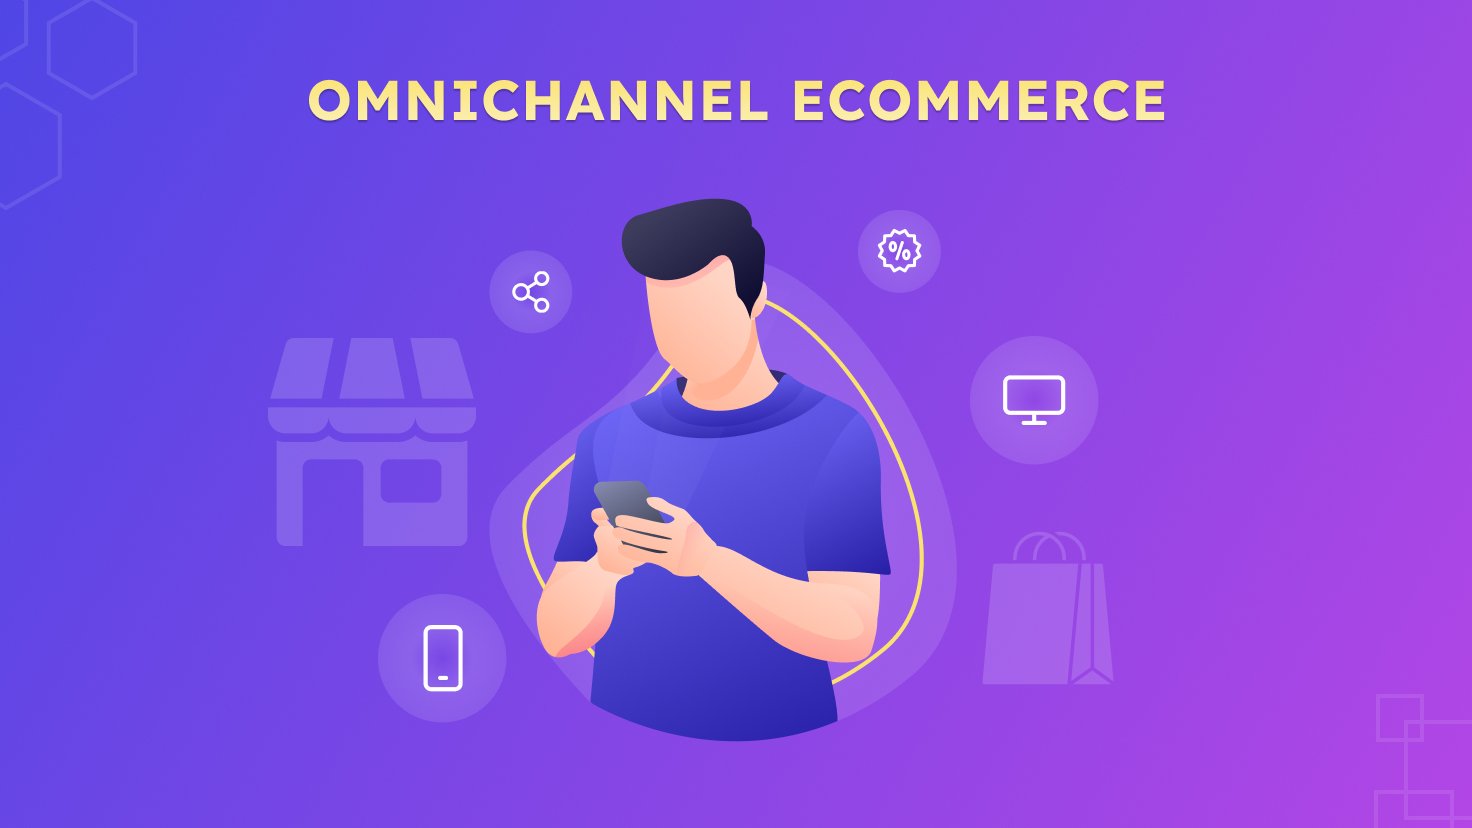 What is Omnichannel eCommerce